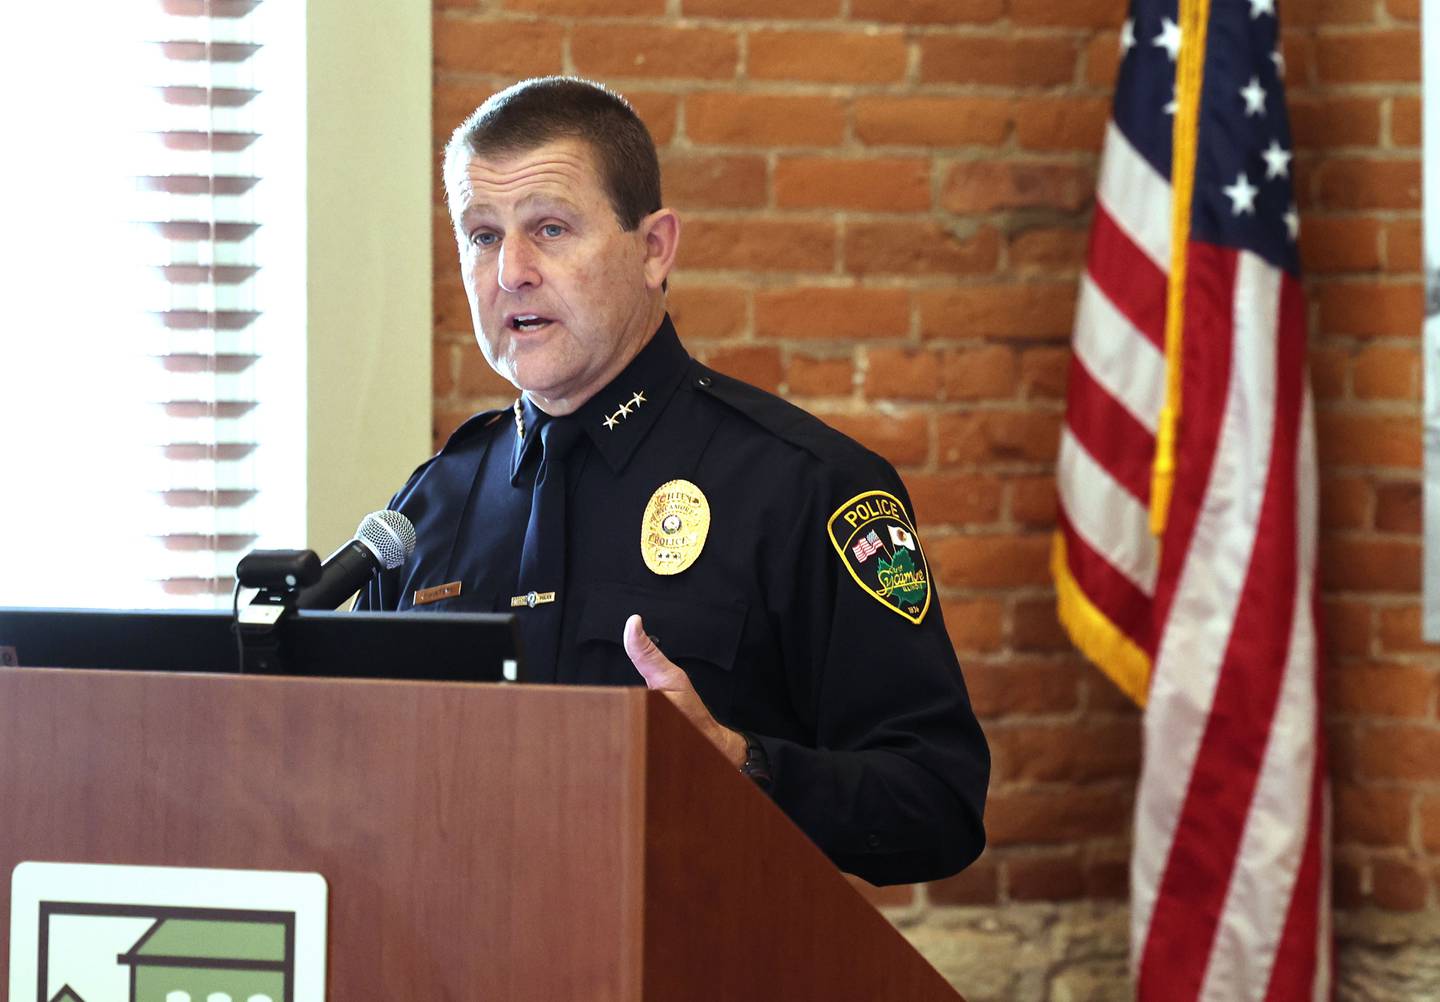 Sycamore Police Chief Jim Winters speaks, Wednesday, Sept. 13, 2023 during the Community Protection and Well-Being Forum: A Conversation about the Safe-T Act, in the DeKalb County Community Foundation Freight Room in Sycamore. The event was hosted by the Sycamore Chamber of Commerce.